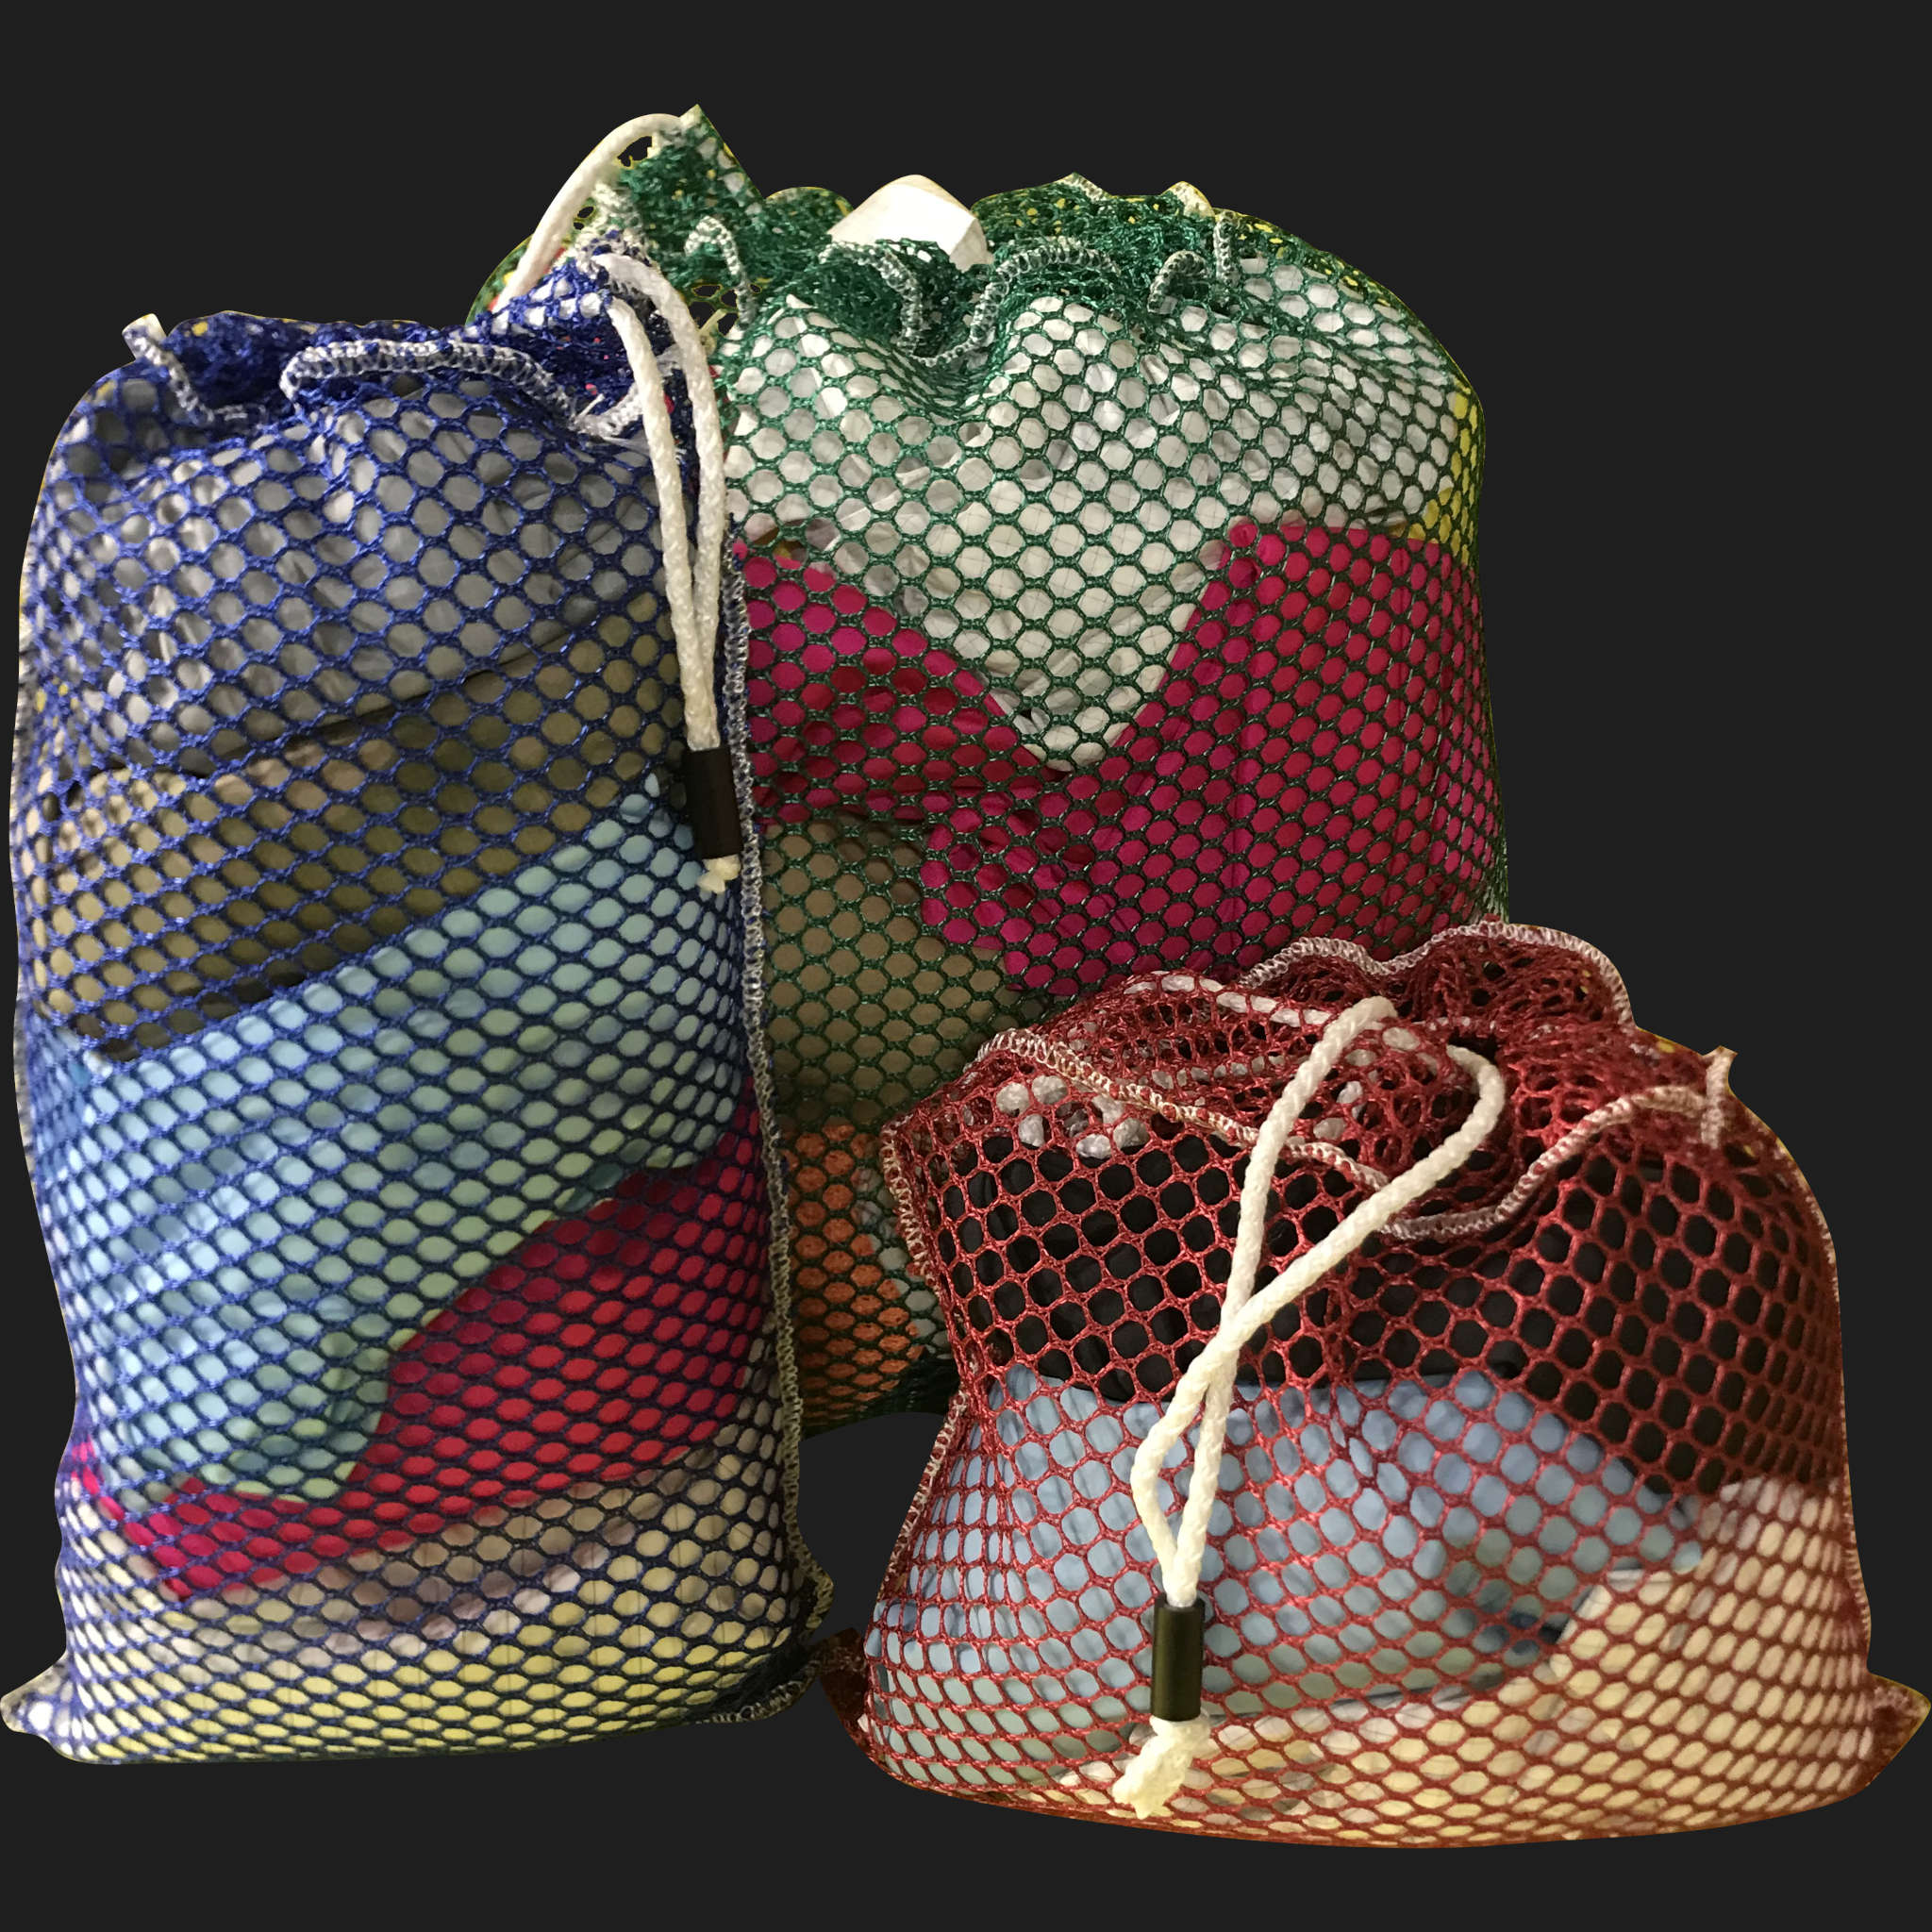 18" x 40" Customized Mesh-Net-Laundry Bags Heavy Duty with Cord and barrellock closure